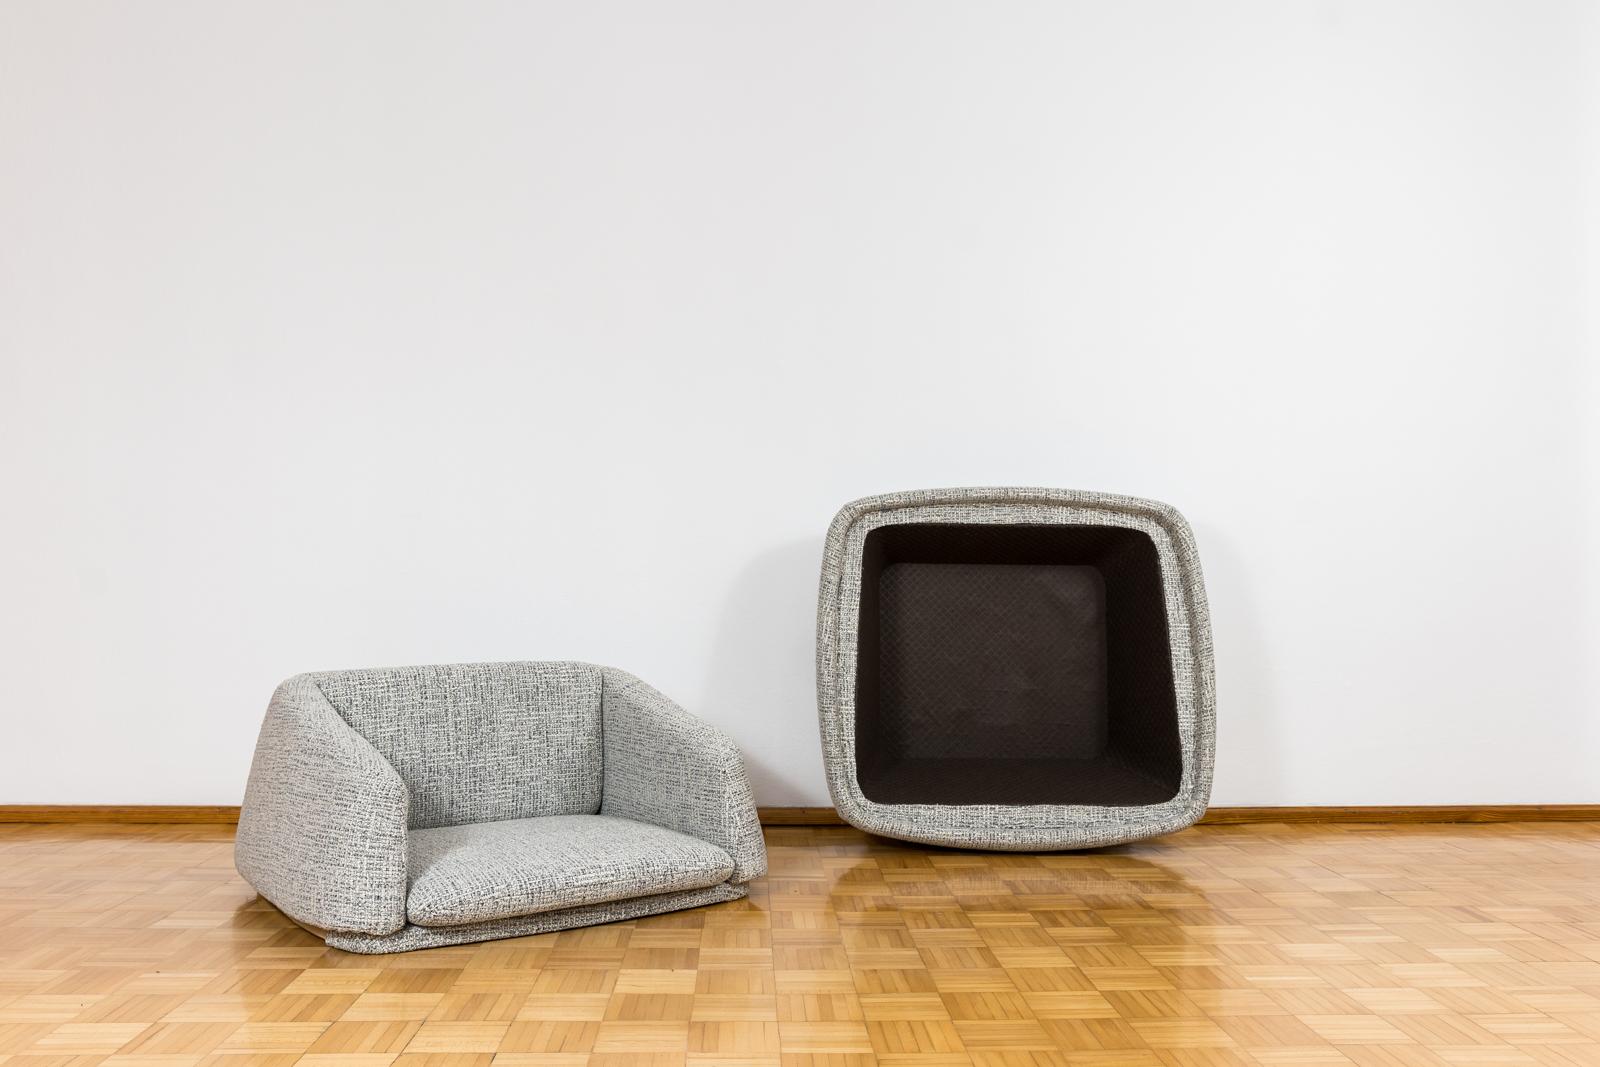 Customizable Space Age Lounge Chair From Lubuskie Fabryki Mebli, 1970s For Sale 4